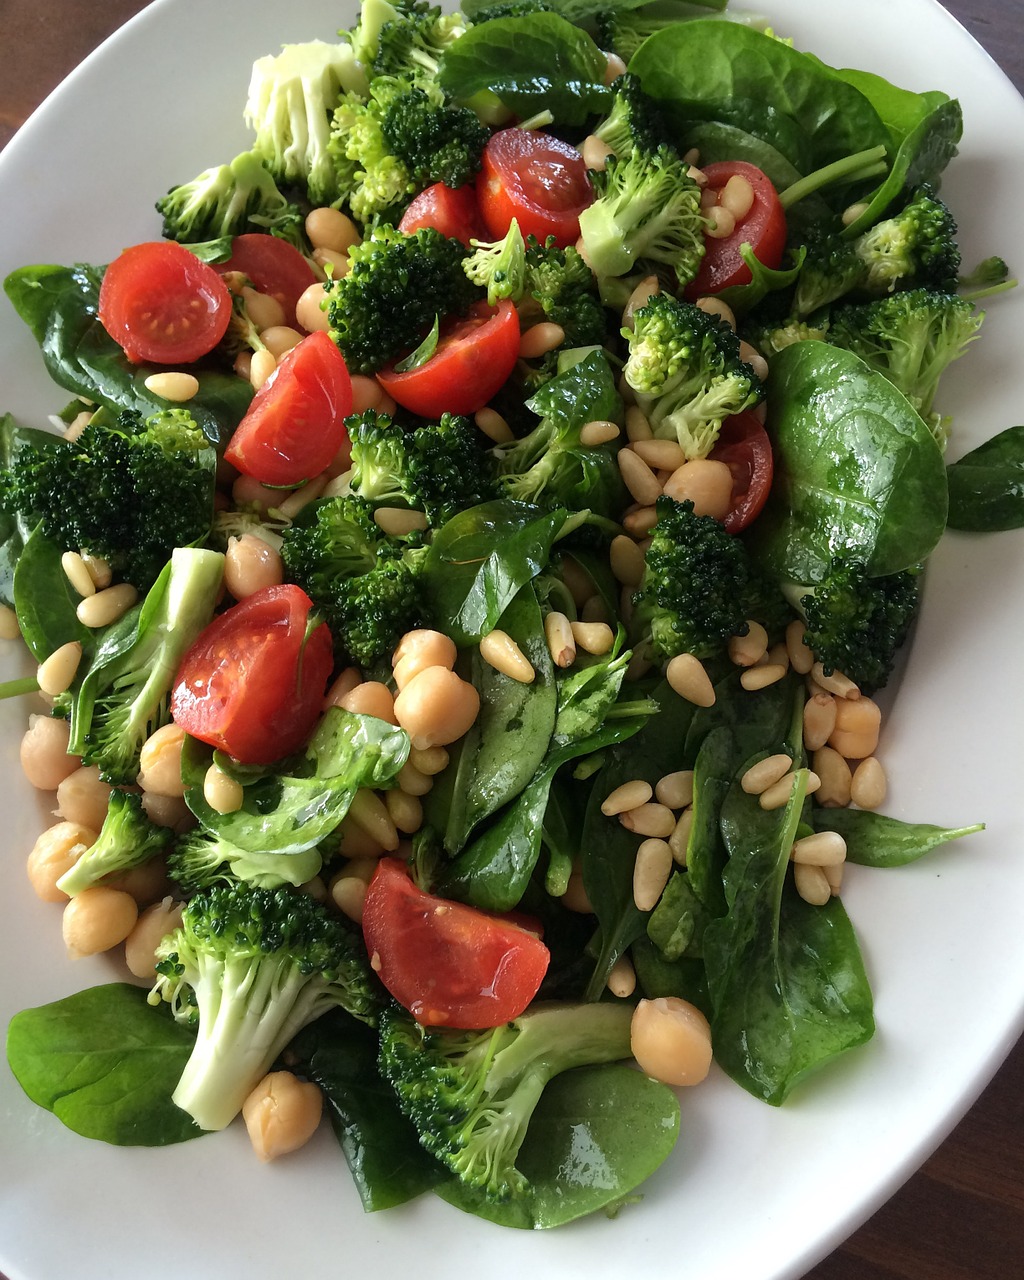 Sweet and sour broccoli stalks with pine nuts